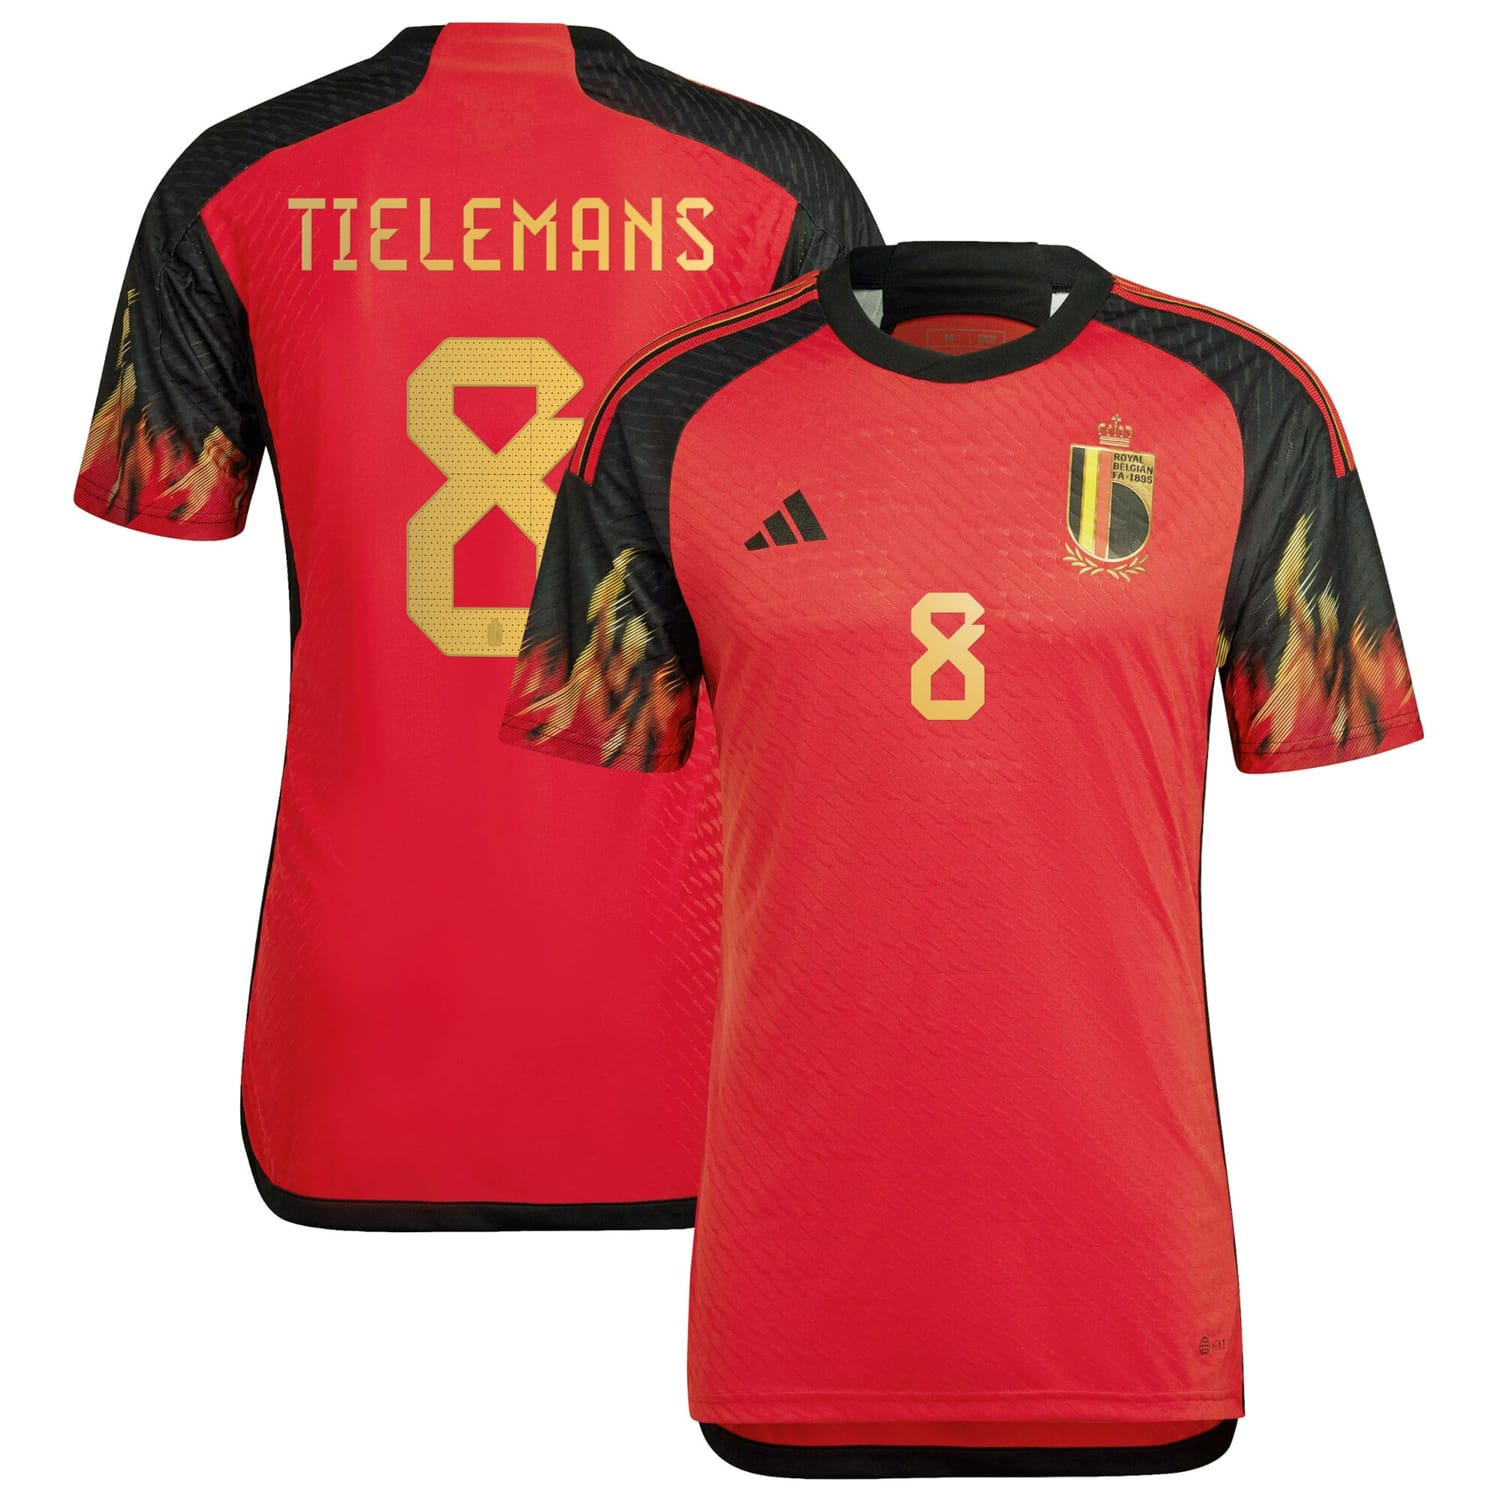 Belgium National Team Home Authentic Jersey Shirt 2022 player Youri Tielemans 8 printing for Men